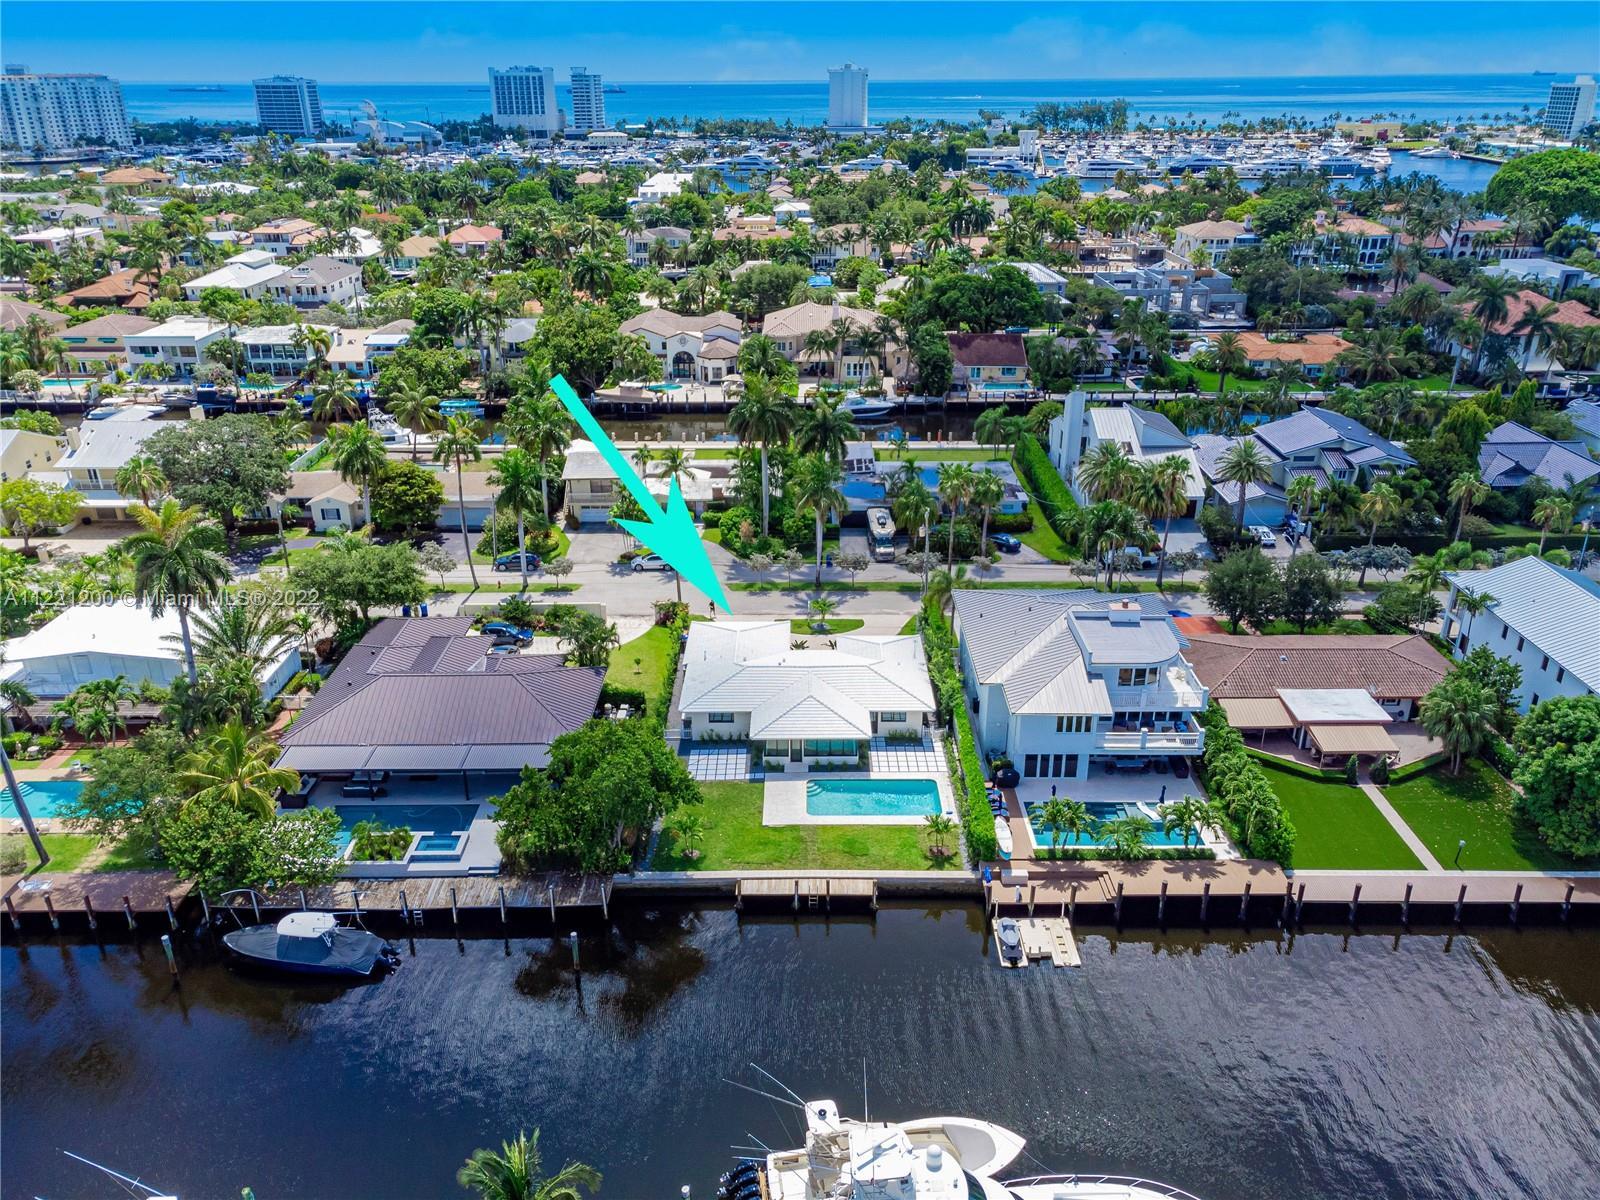 Prime Las Olas waterfront location! One of the few gated communities on Las Olas. The home total sq 